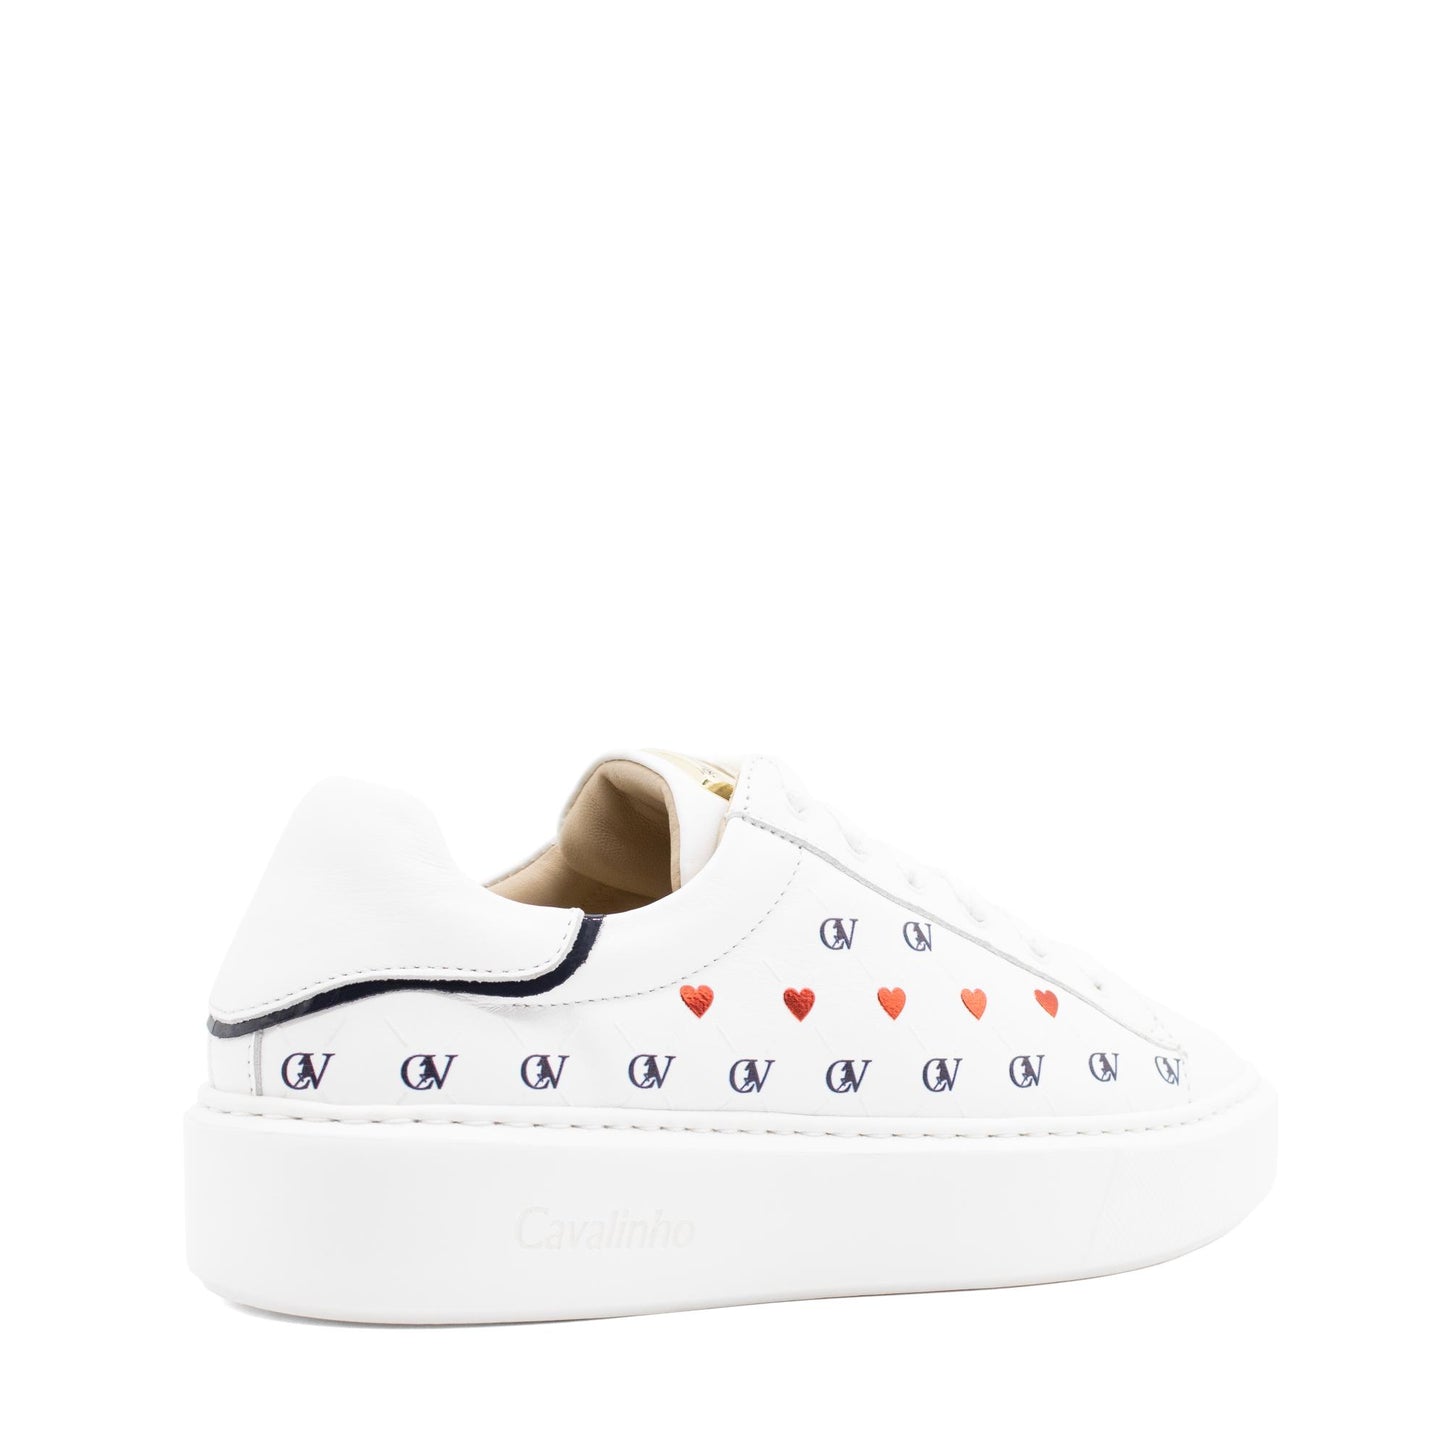 Cavalinho Love Yourself Sneakers - Navy / White / Red - 48010108.22_3